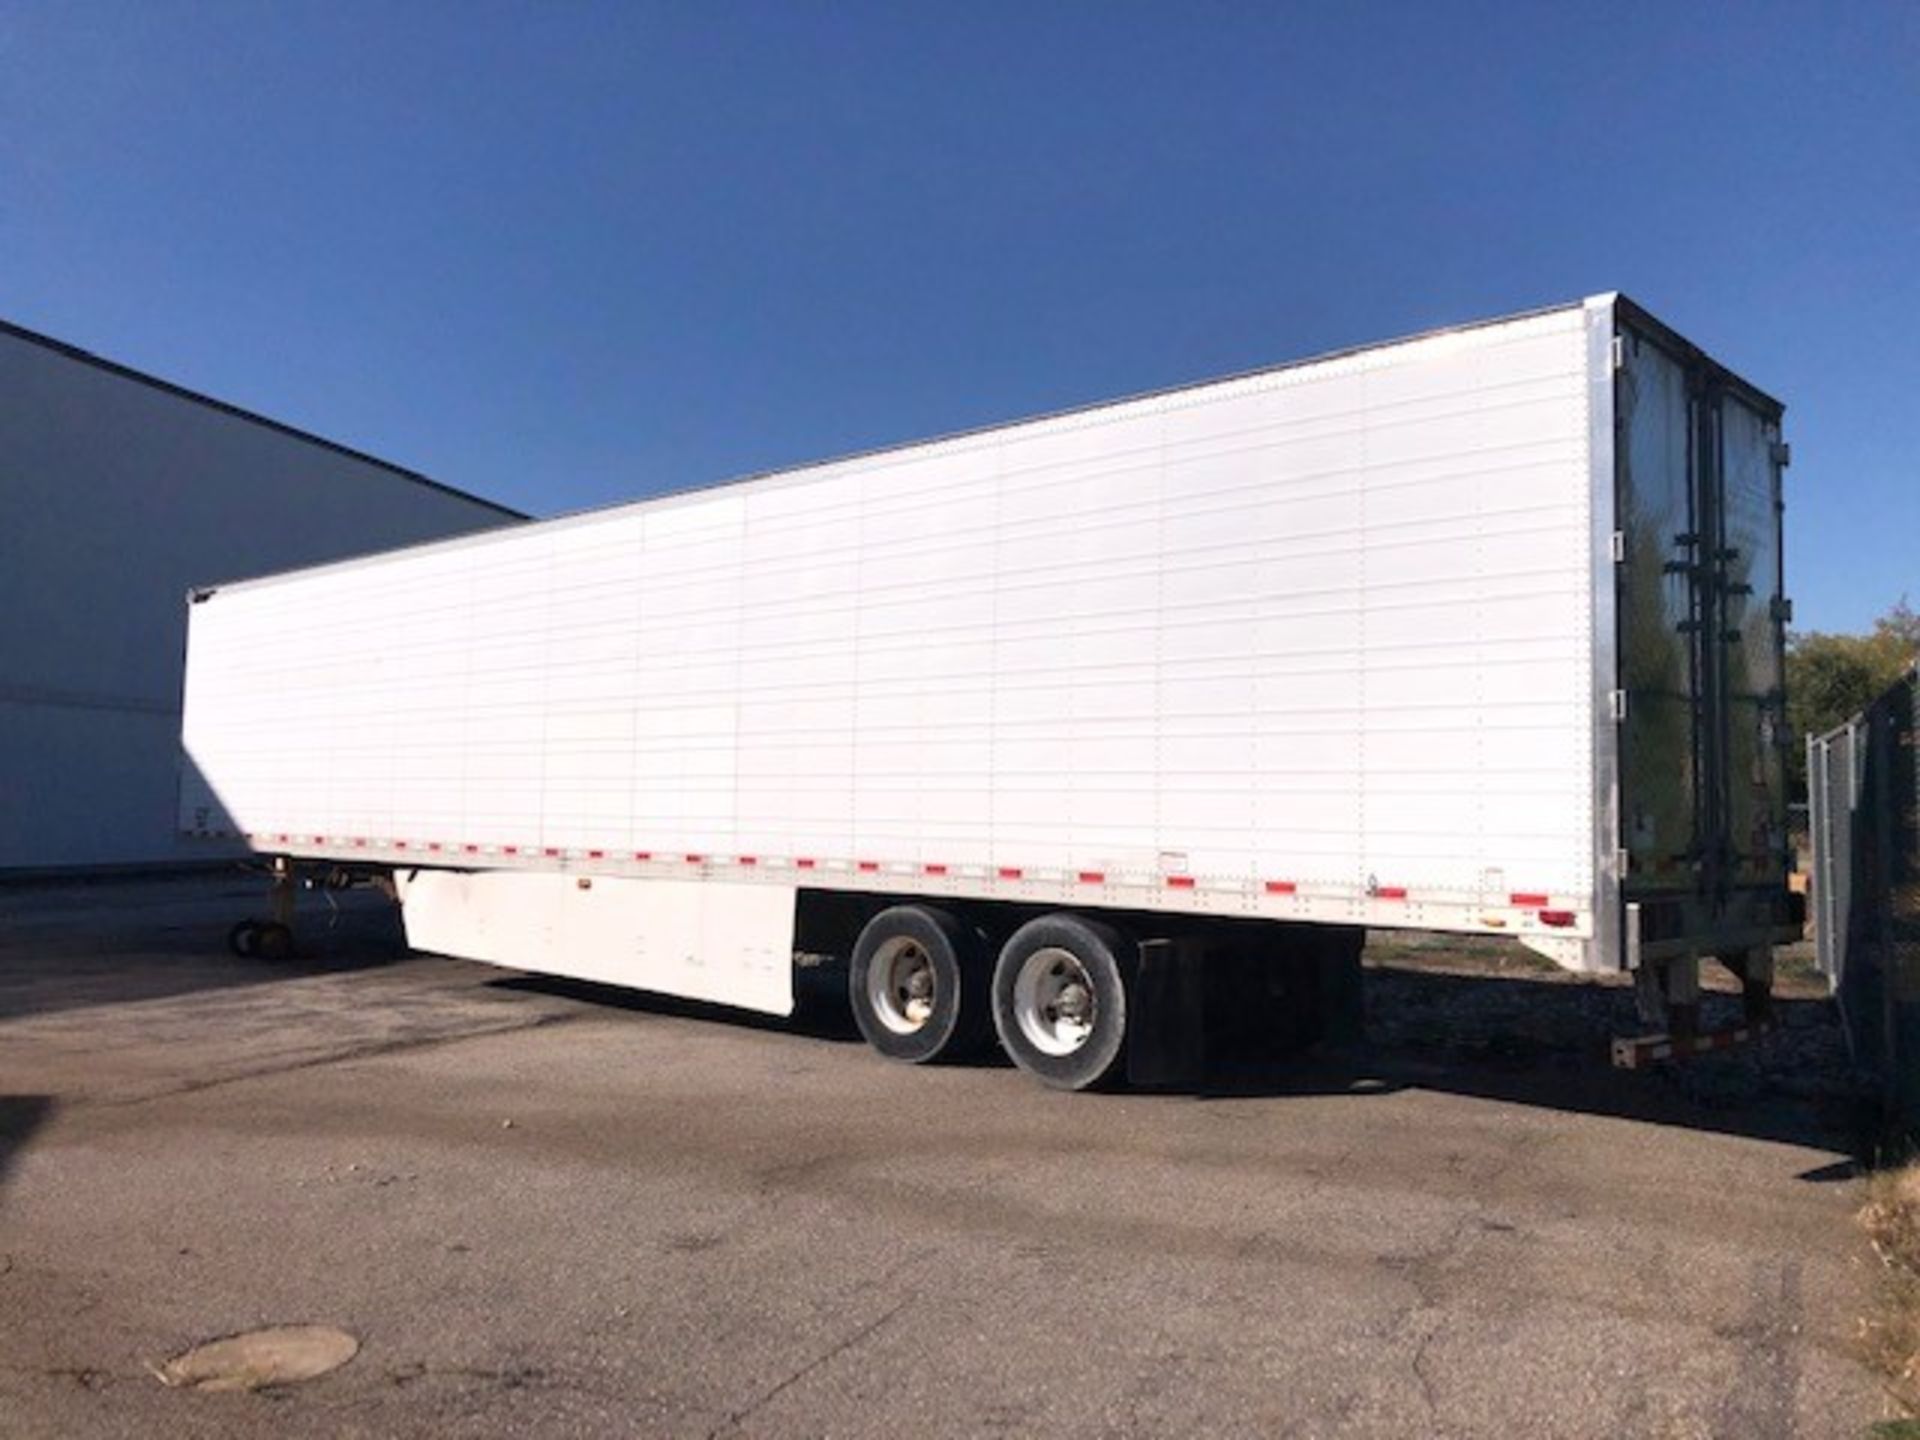 2009 Great Dane Refrigerated Trailer, VIN#: 1GRAA0626AW702306, M/N SUP-111411G53, with Carrier Refer - Image 9 of 21